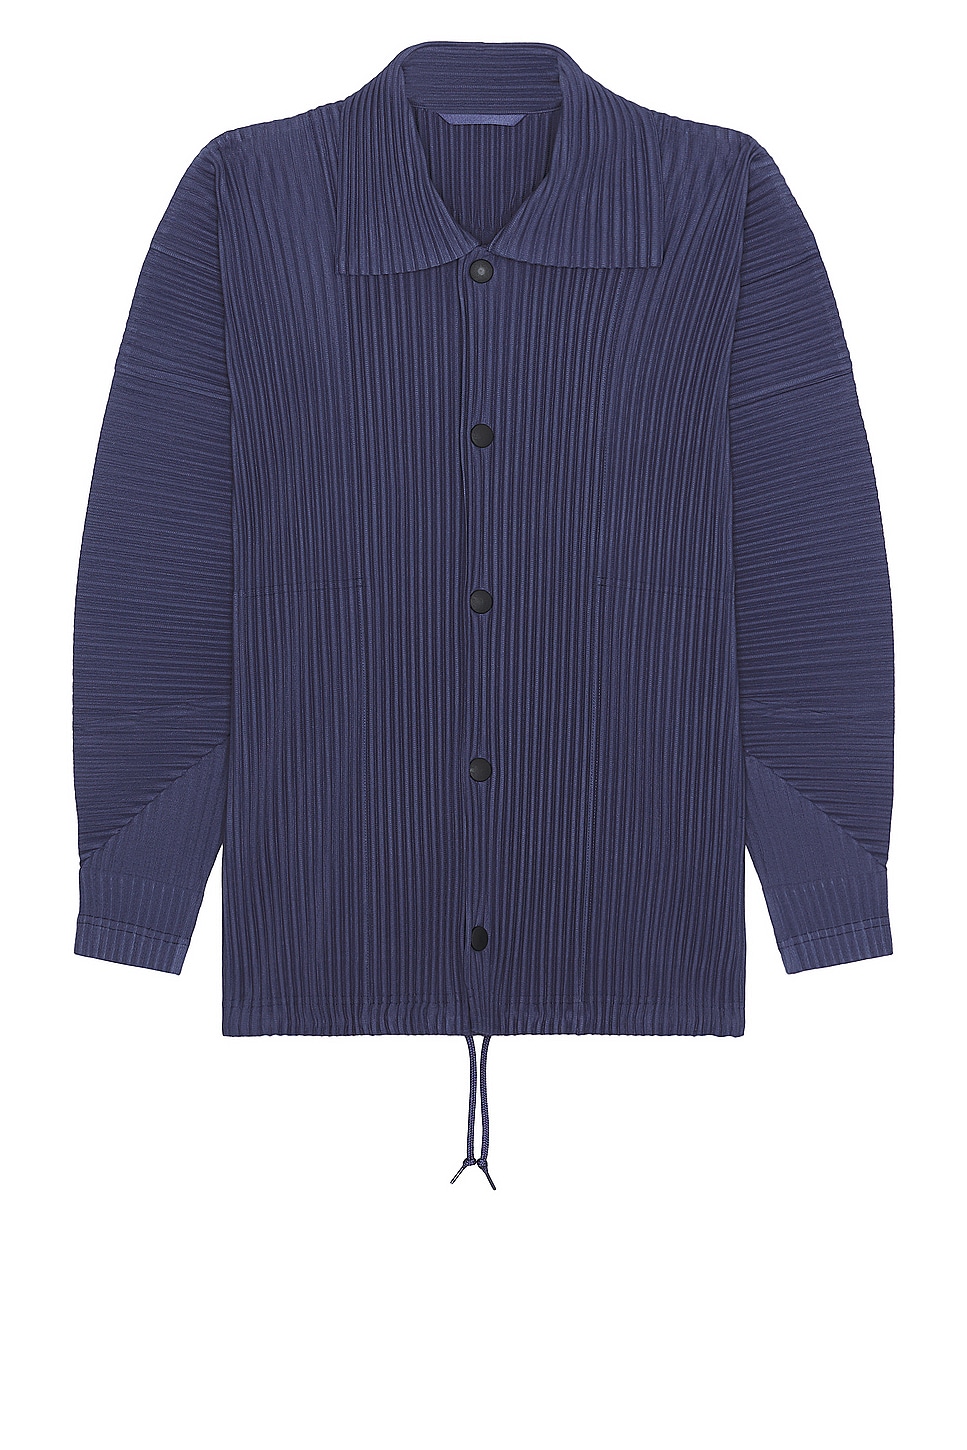 Image 1 of Homme Plisse Issey Miyake Pleated Shirt in Blue Charcoal